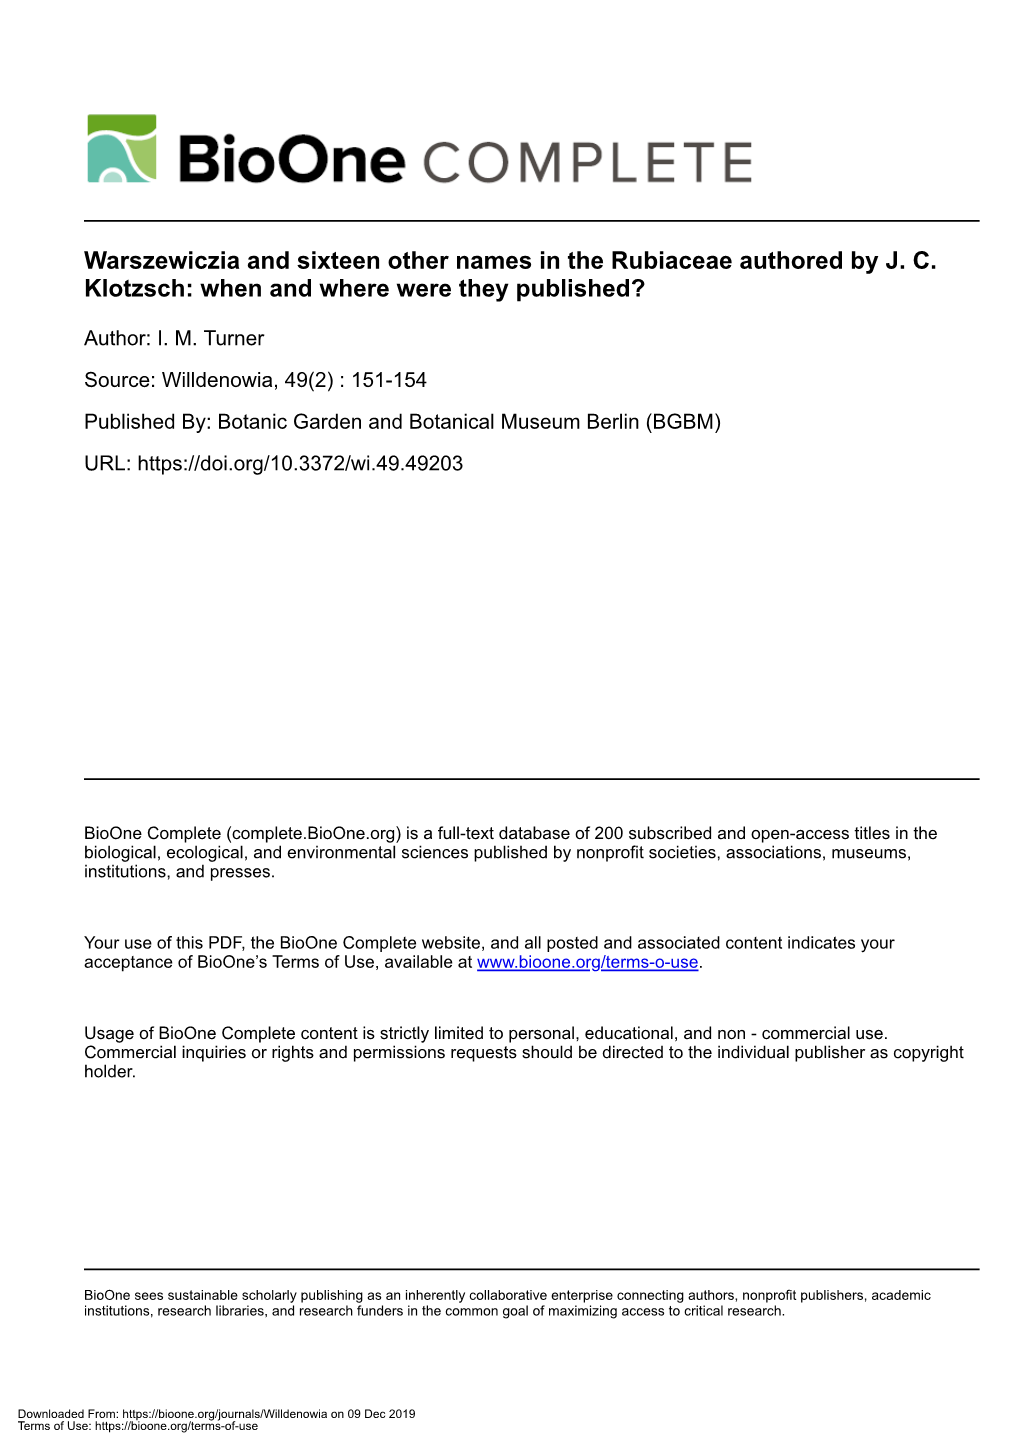 Warszewiczia and Sixteen Other Names in the Rubiaceae Authored by J